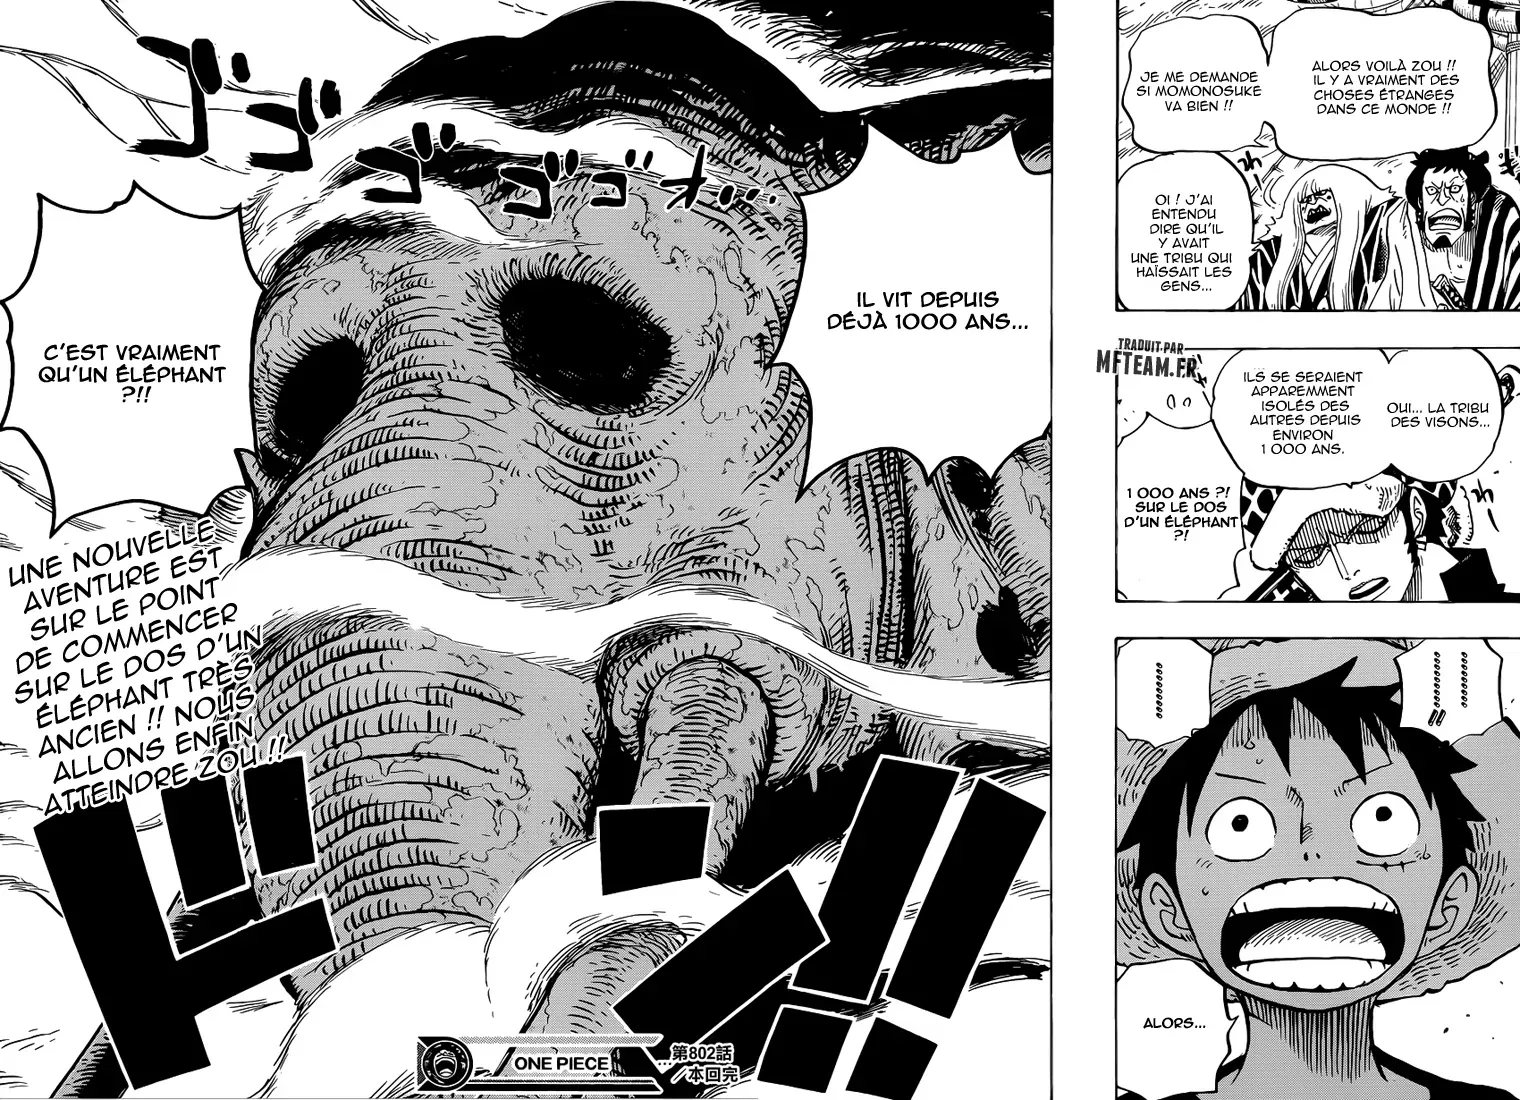 One Piece: Chapter chapitre-802 - Page 15